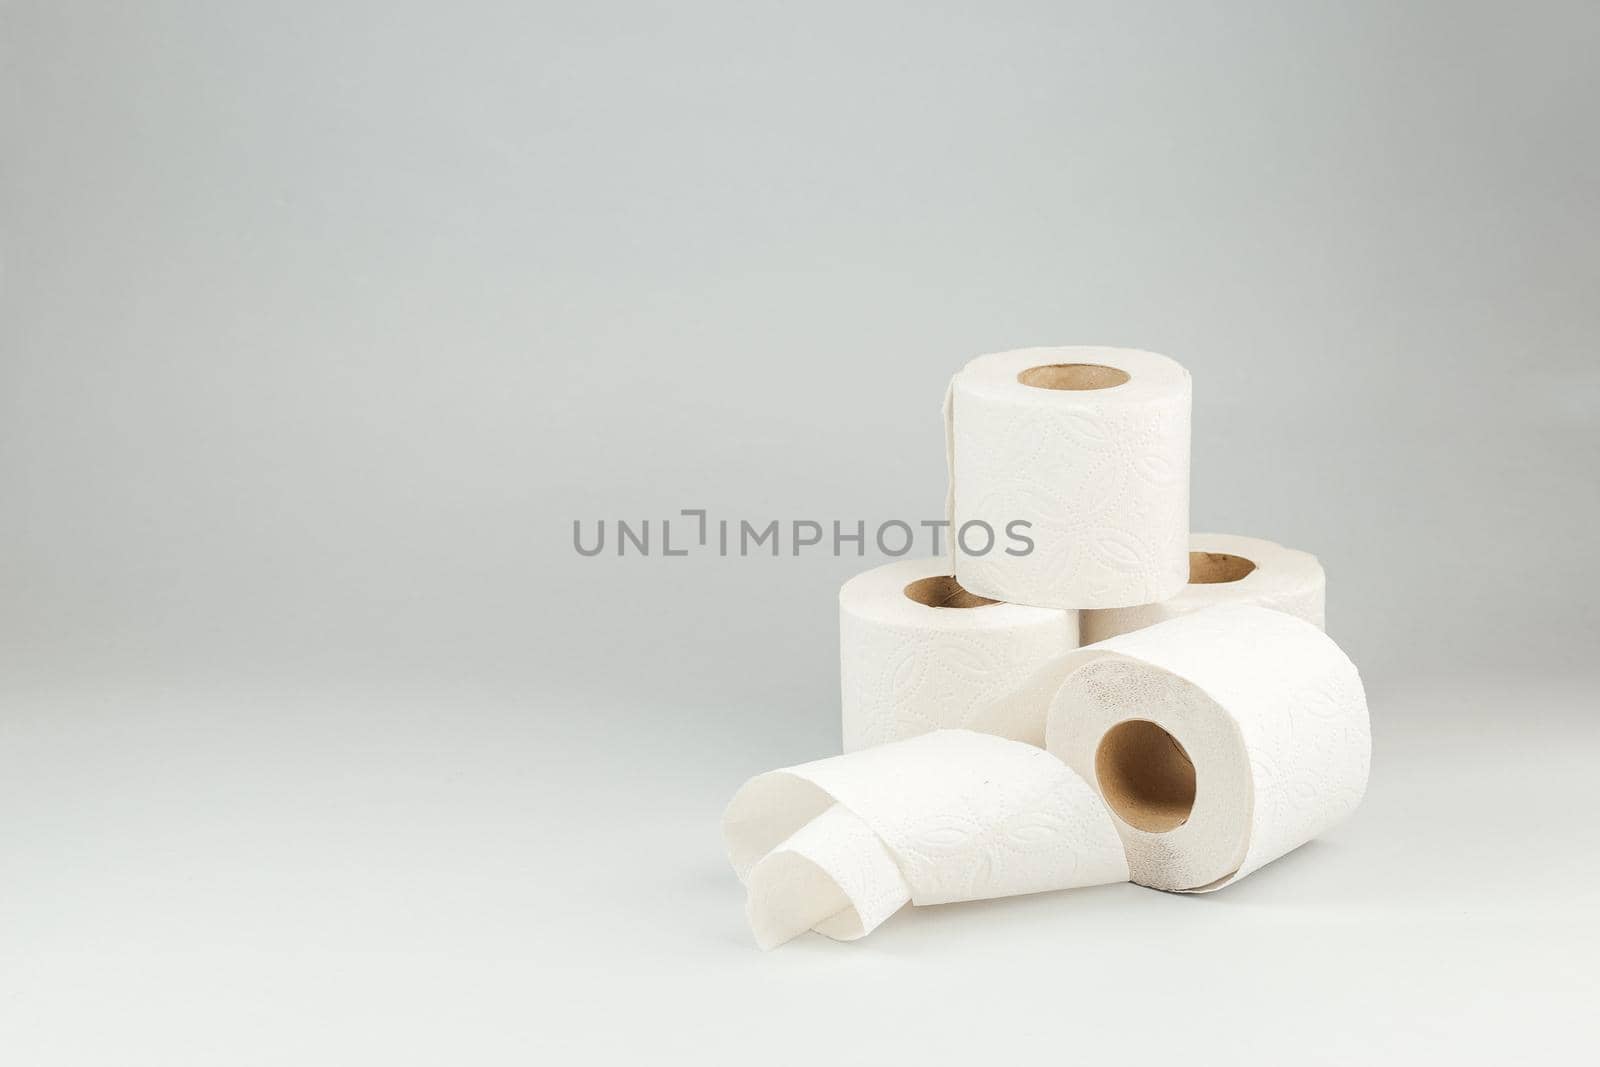 Rolls of Soft White Toilet Paper over Gray Background. Hygiene concept. Copy Space for text